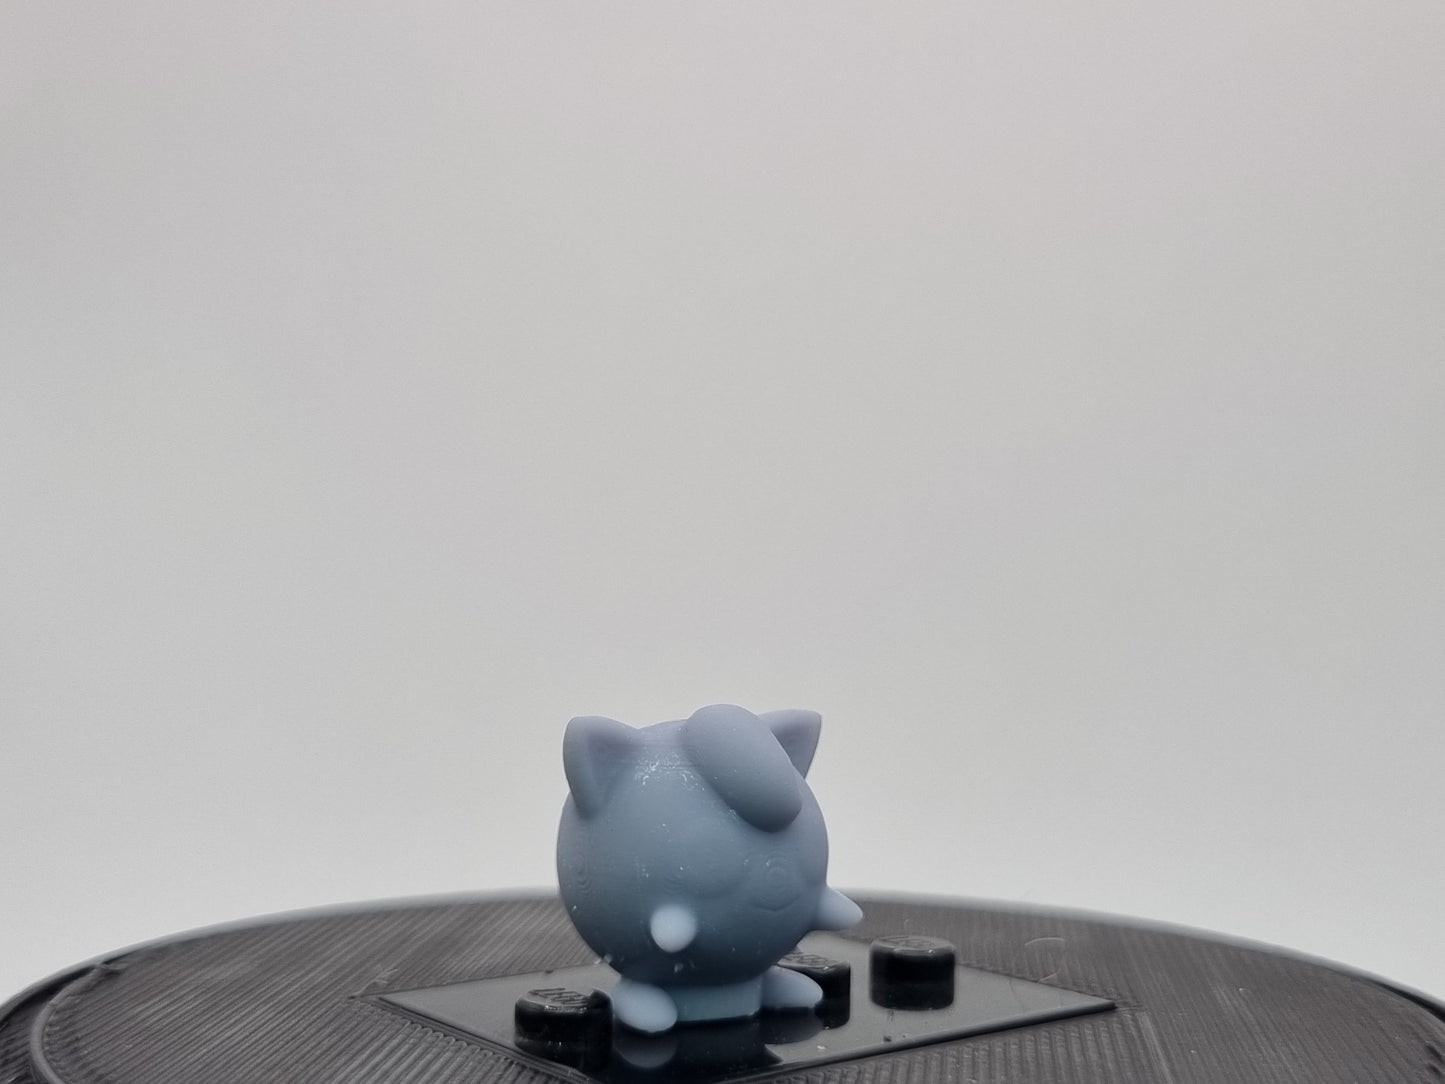 lego compatible 3D printed puffed pet!